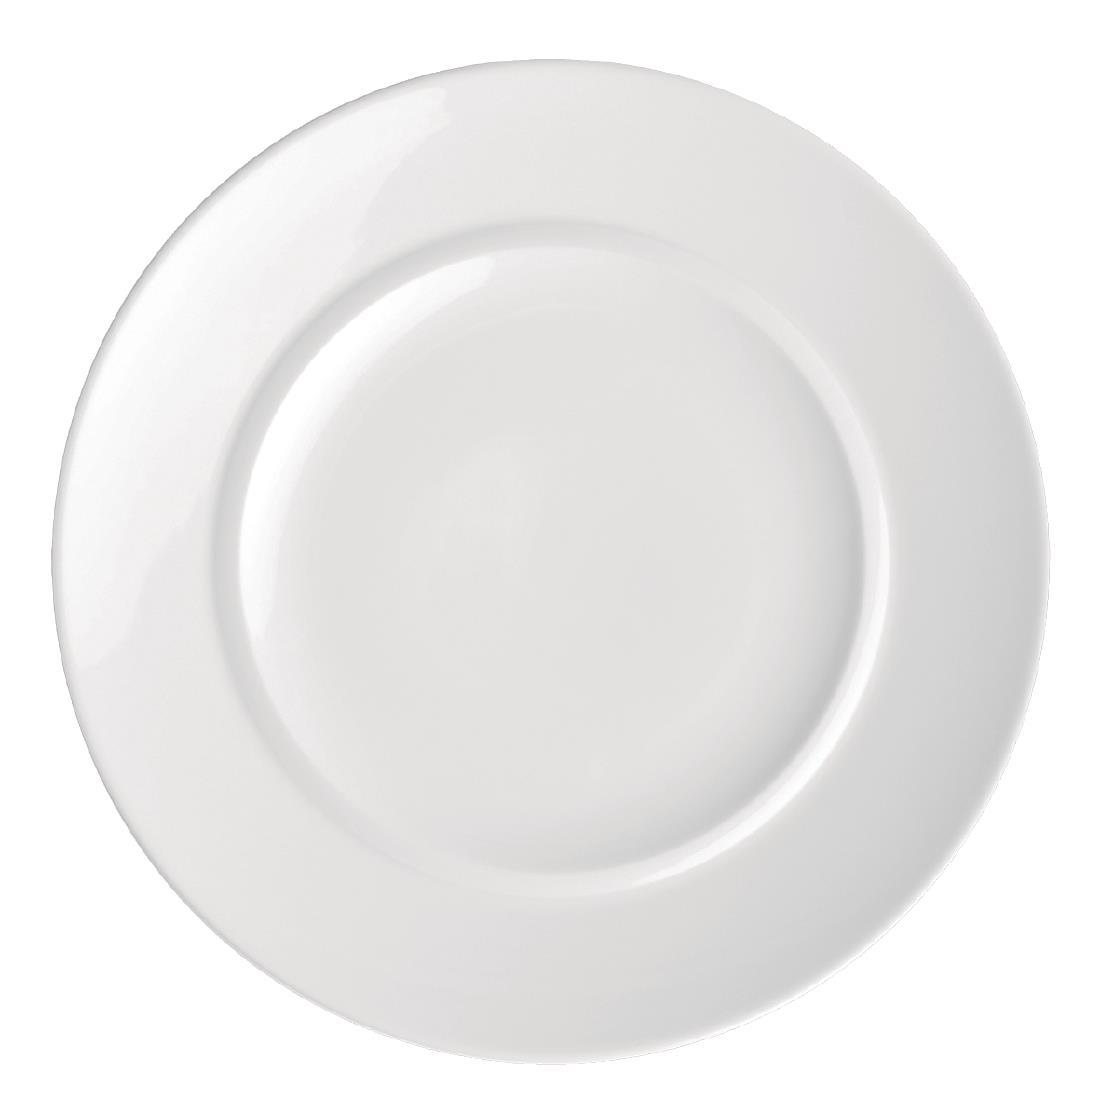 Royal Porcelain Classic White Flat Plate 280mm (Pack of 12) - GT935  - 2